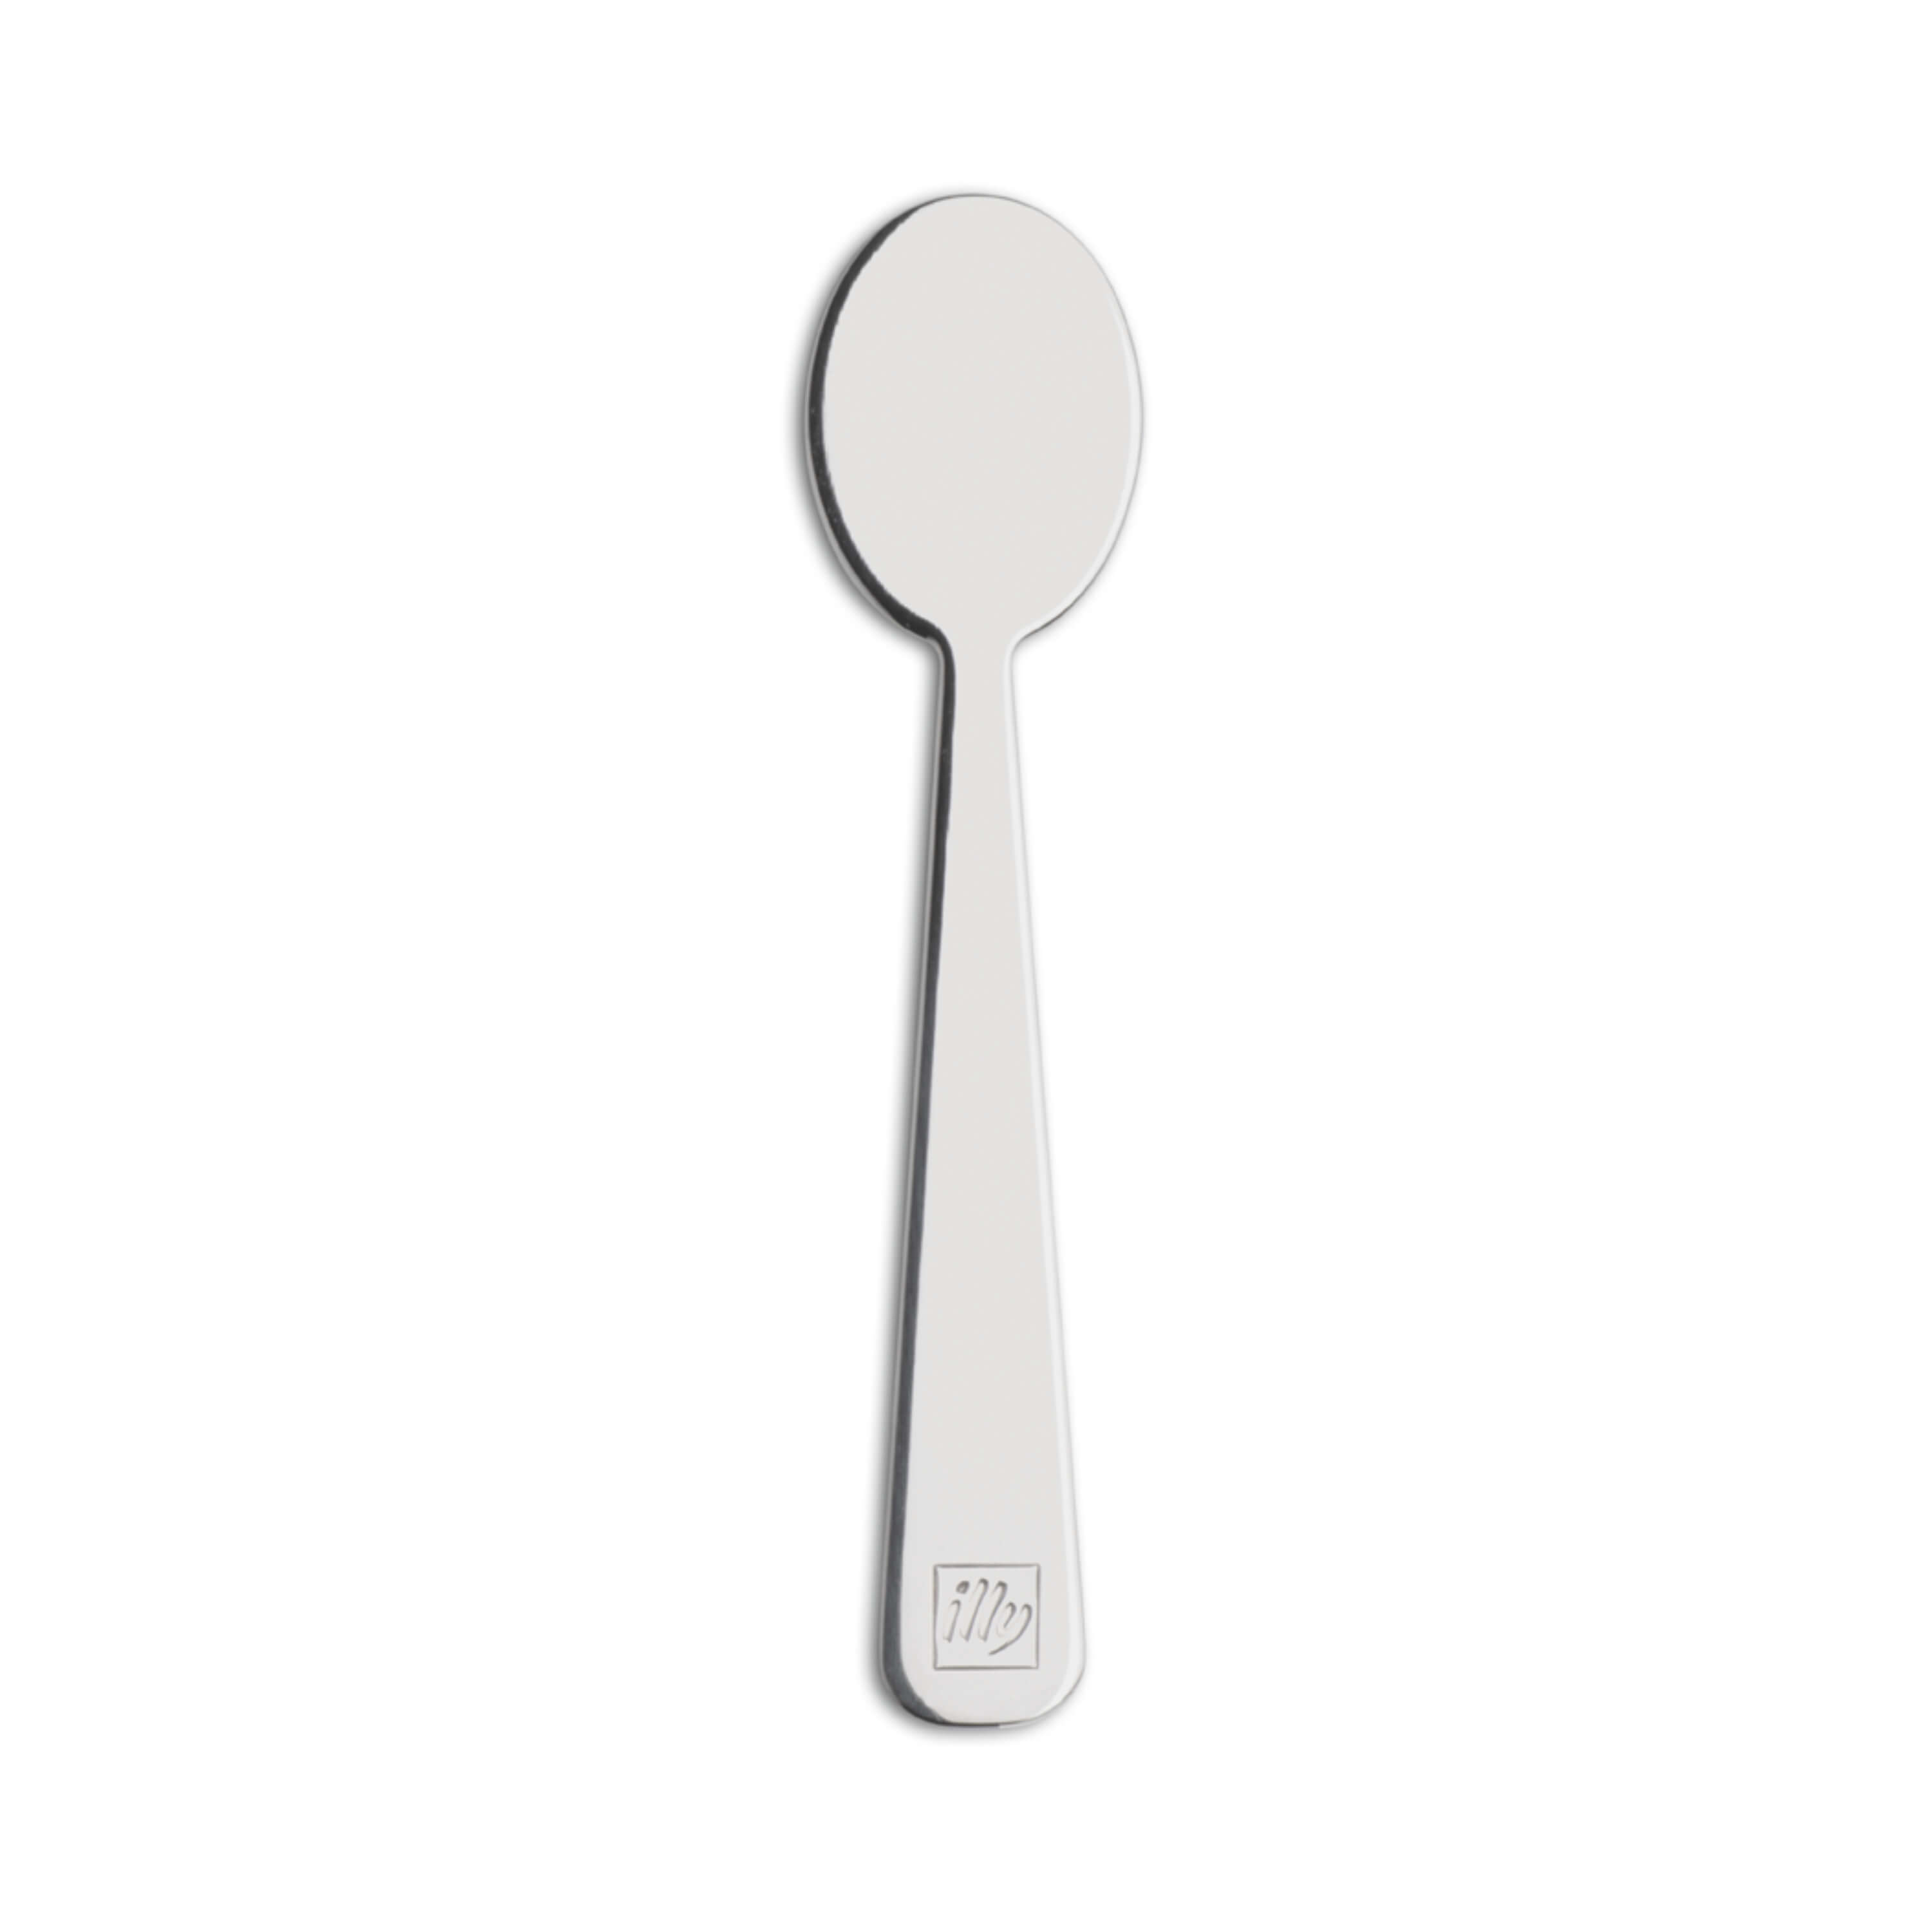 illy Ombra Spoon, Coffee Accessories, 02-06-0026